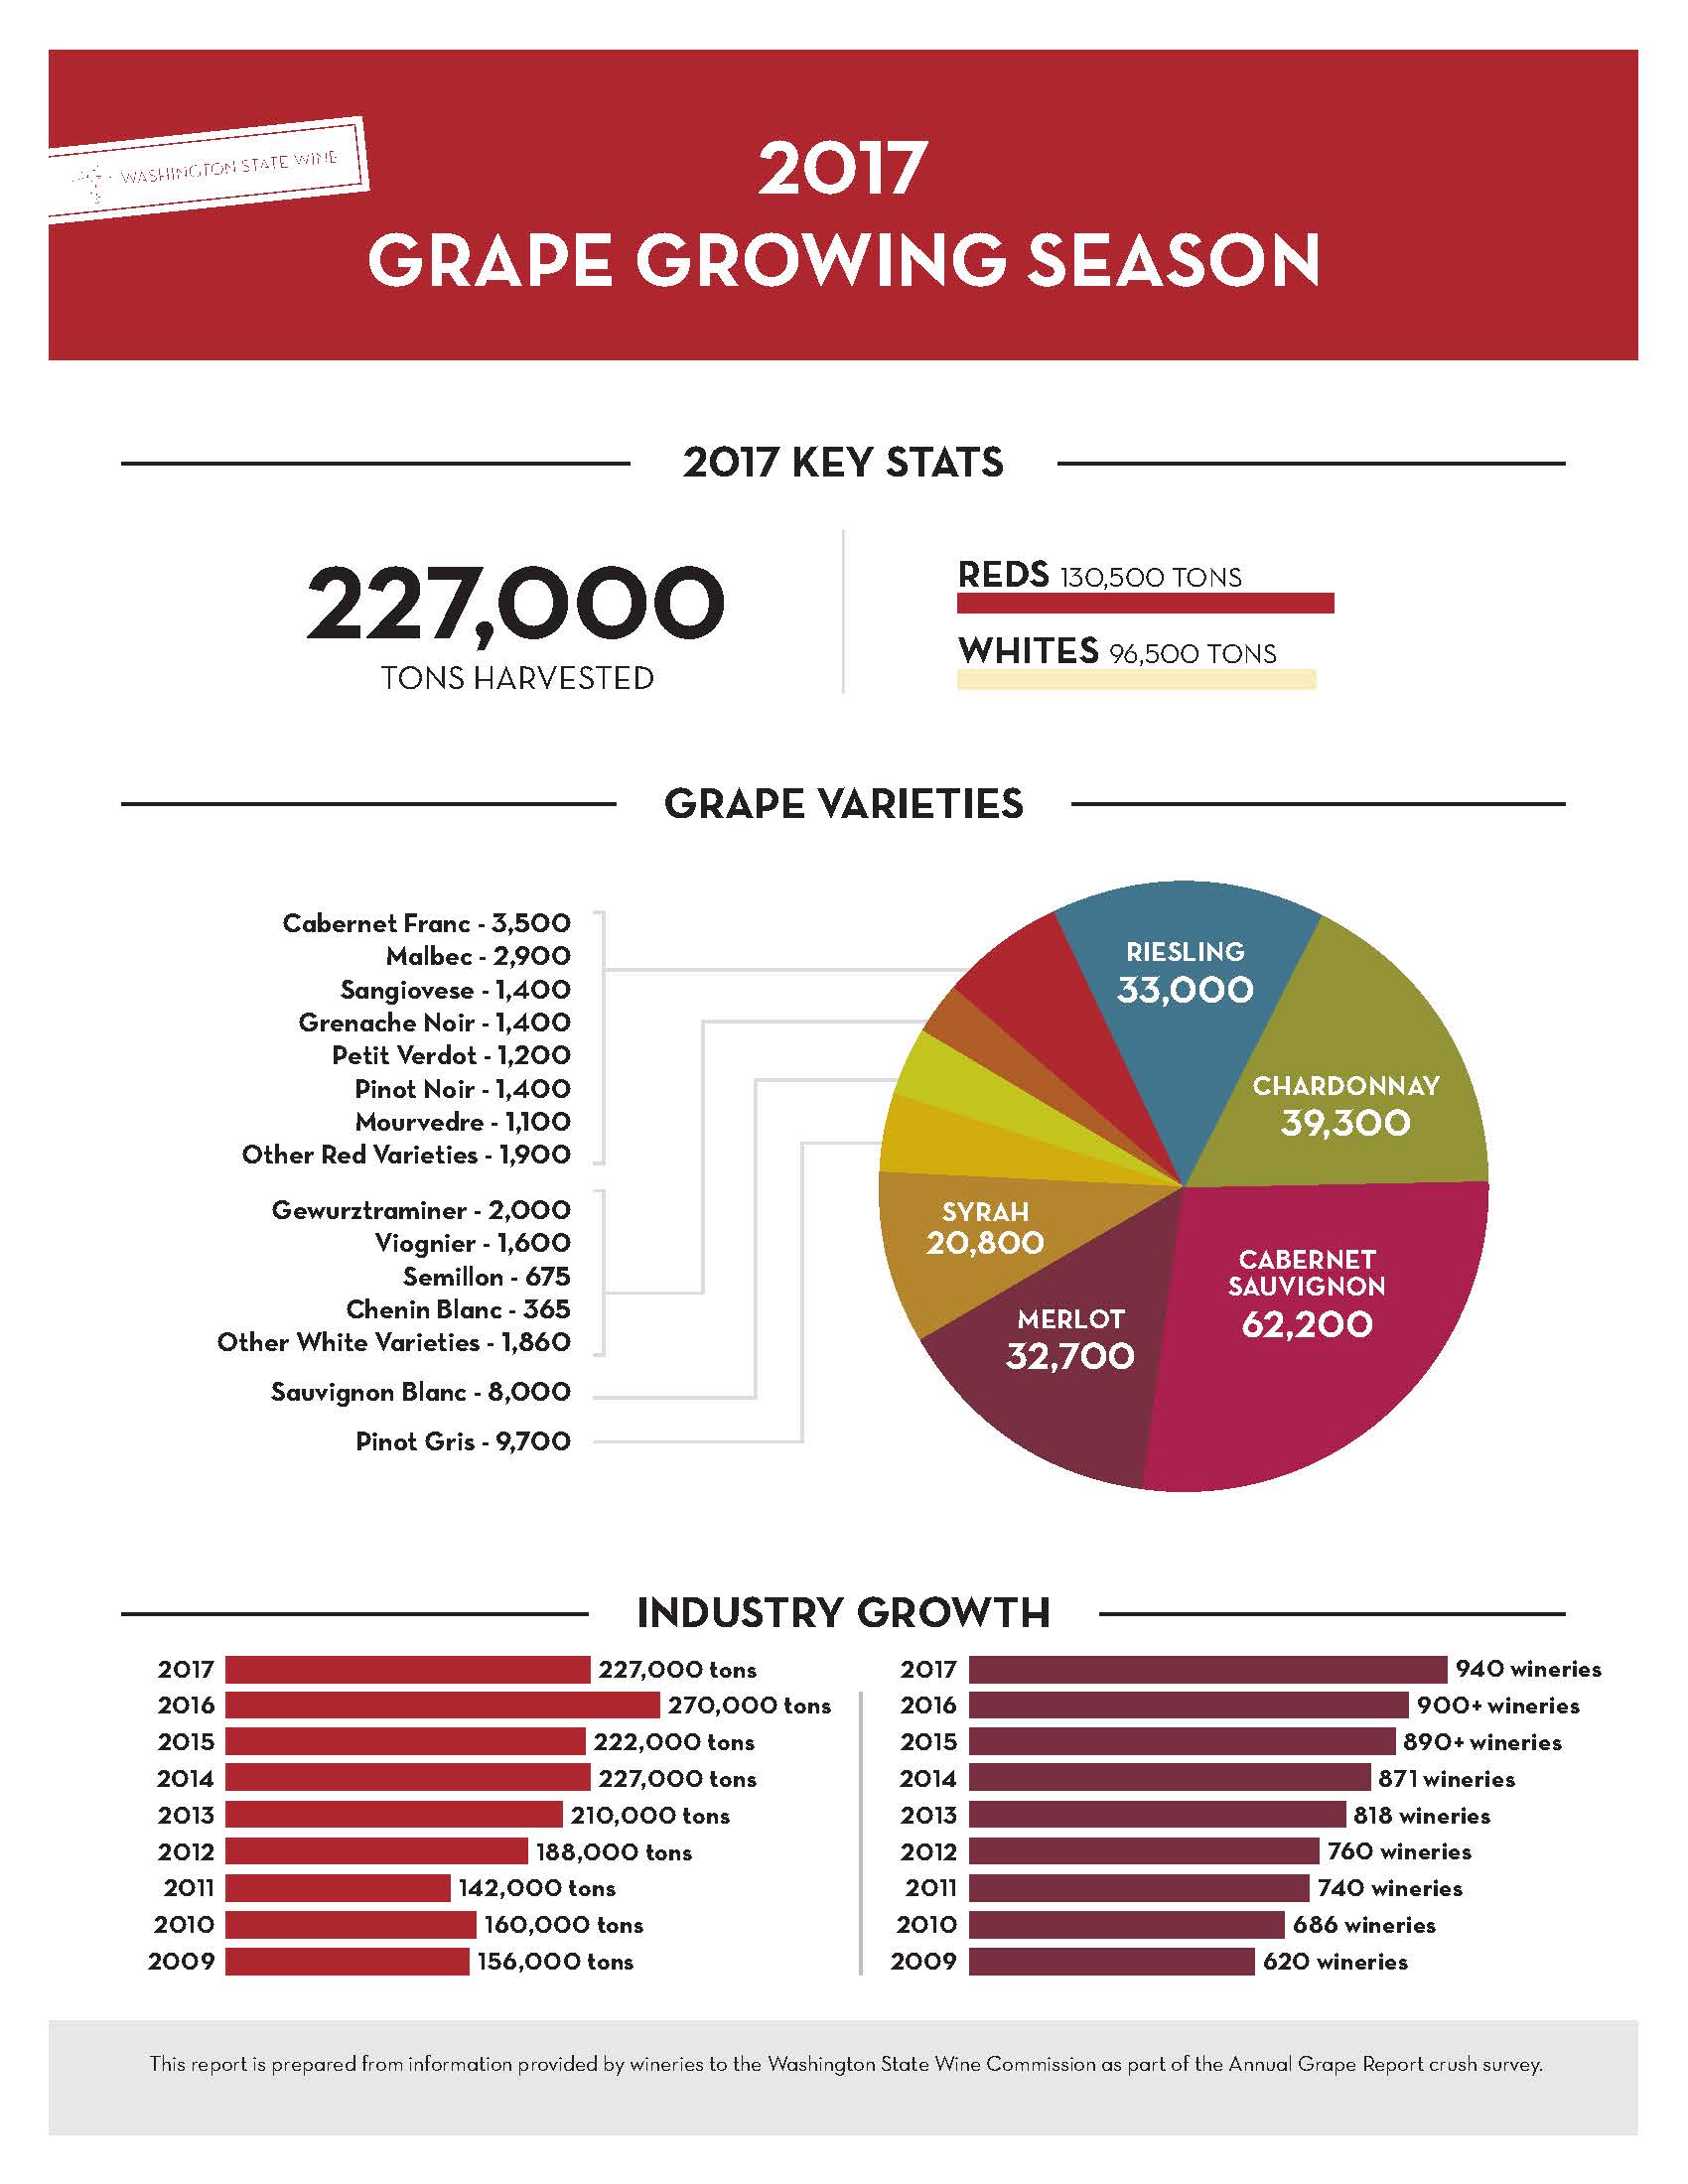 infographic showing the details of the 2017 grape growing season in Washington